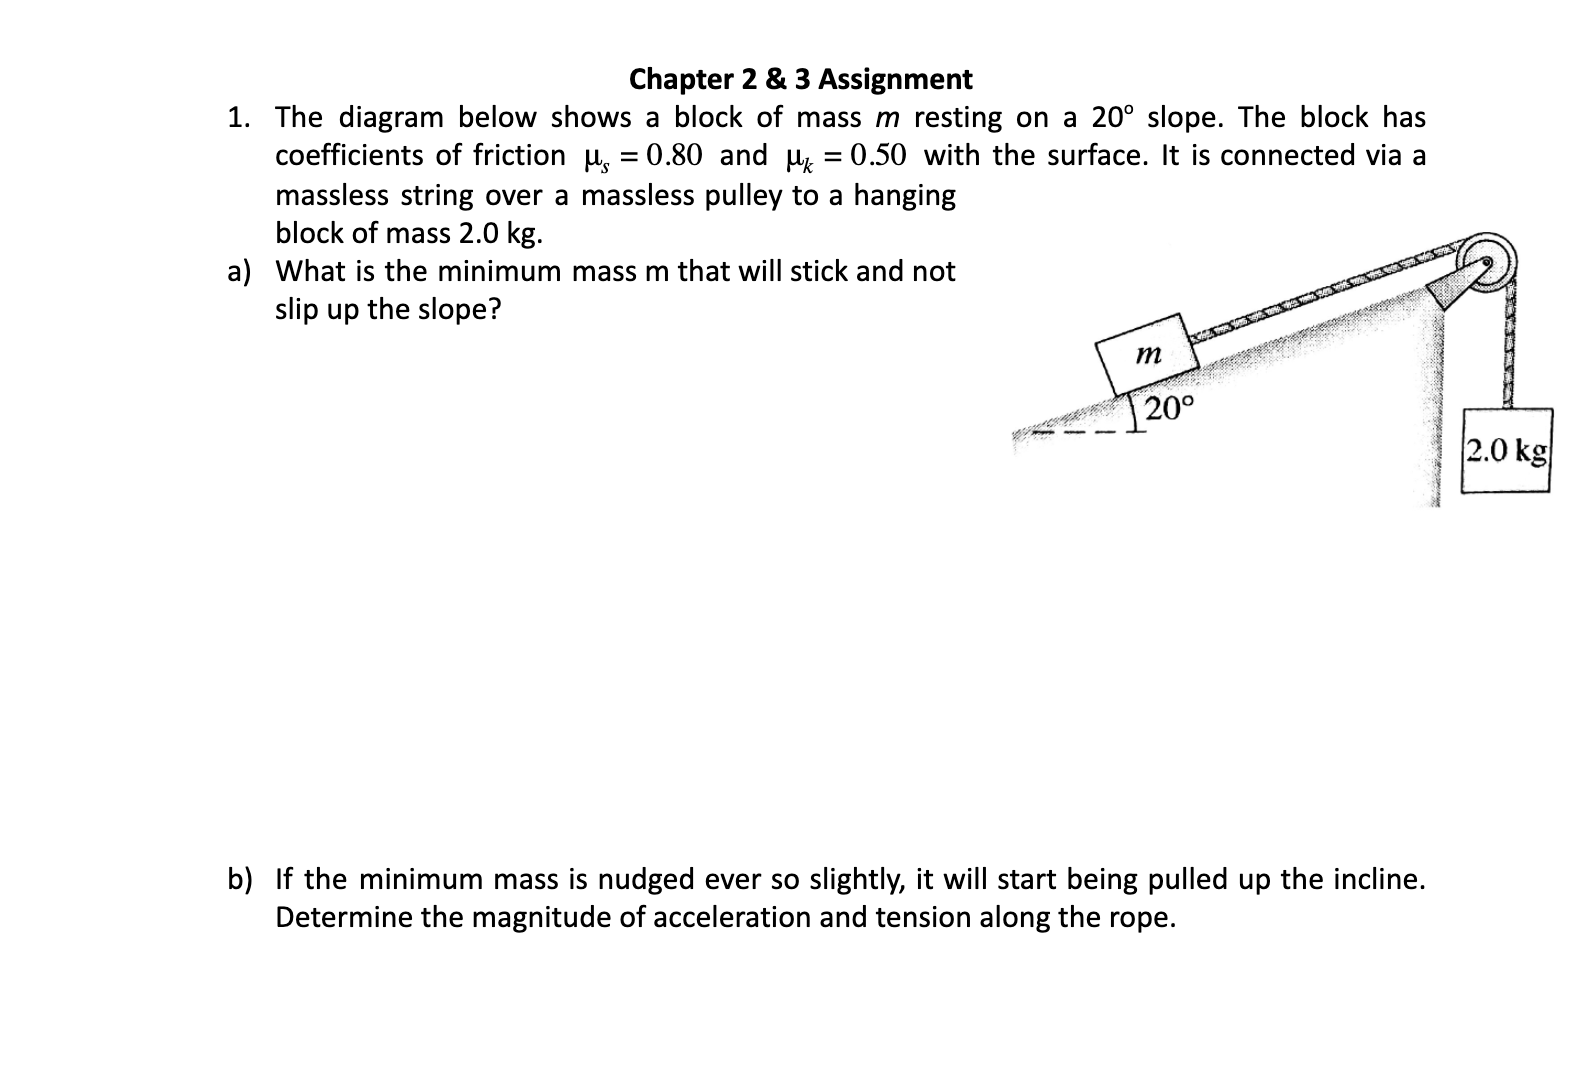 Chapter 2 & 3 Assignment
1. The diagram below shows a block of mass m resting on a 20° slope. The block has
coefficients of friction H, = 0.80 and H = 0.50 with the surface. It is connected via a
massless string over a massless pulley to a hanging
block of mass 2.0 kg.
a) What is the minimum mass m that will stick and not
slip up the slope?
20°
2.0 kg
b) If the minimum mass is nudged ever so slightly, it will start being pulled up the incline.
Determine the magnitude of acceleration and tension along the rope.
